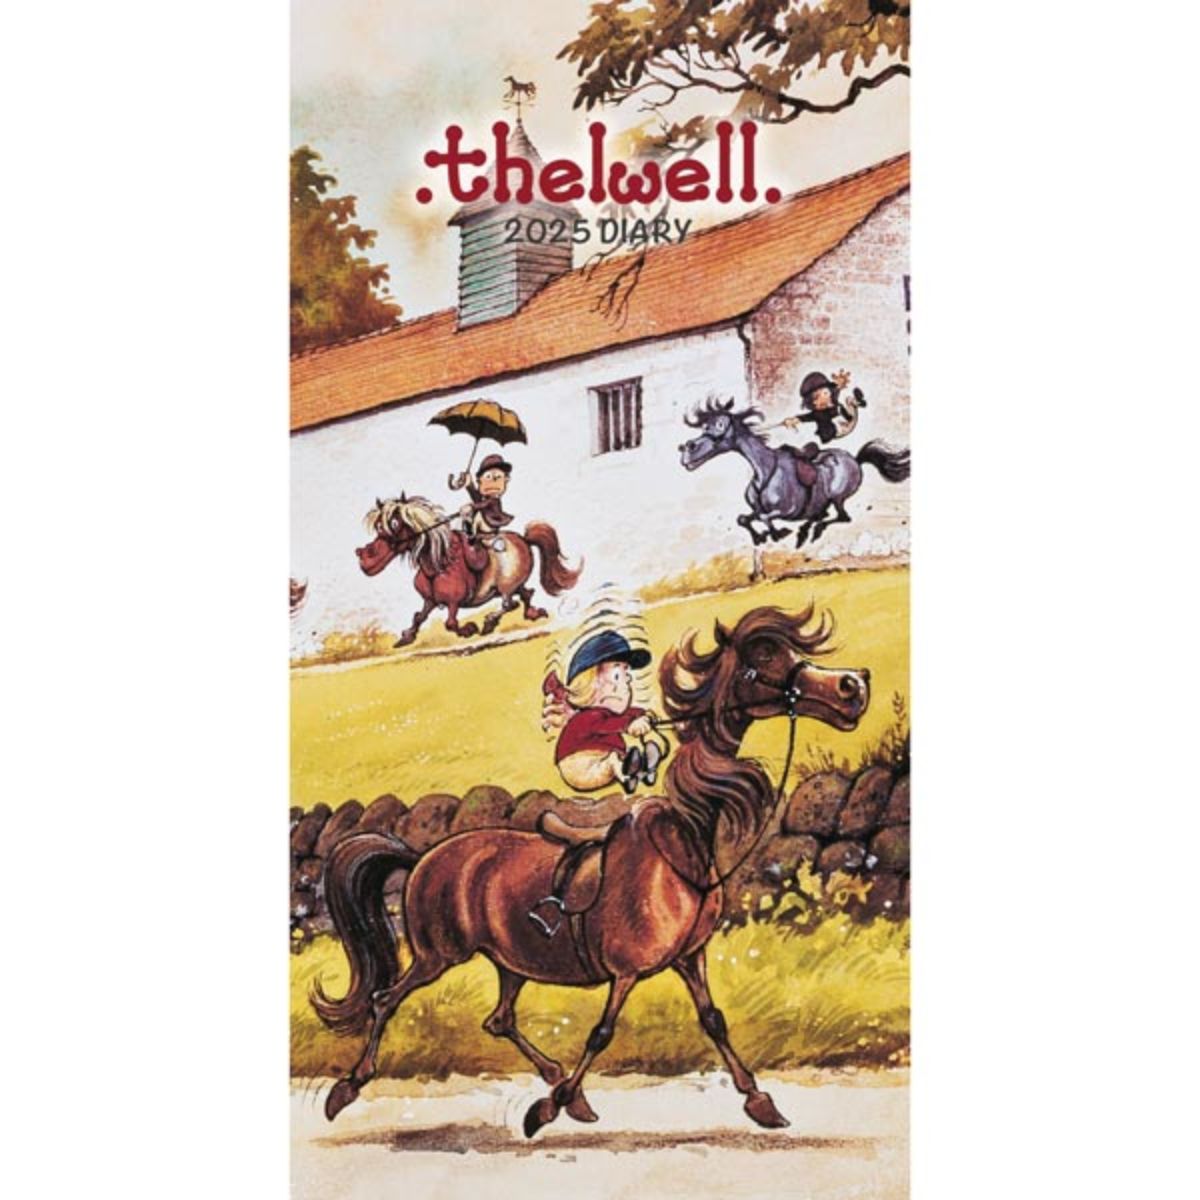 Thelwell 2025 Diary